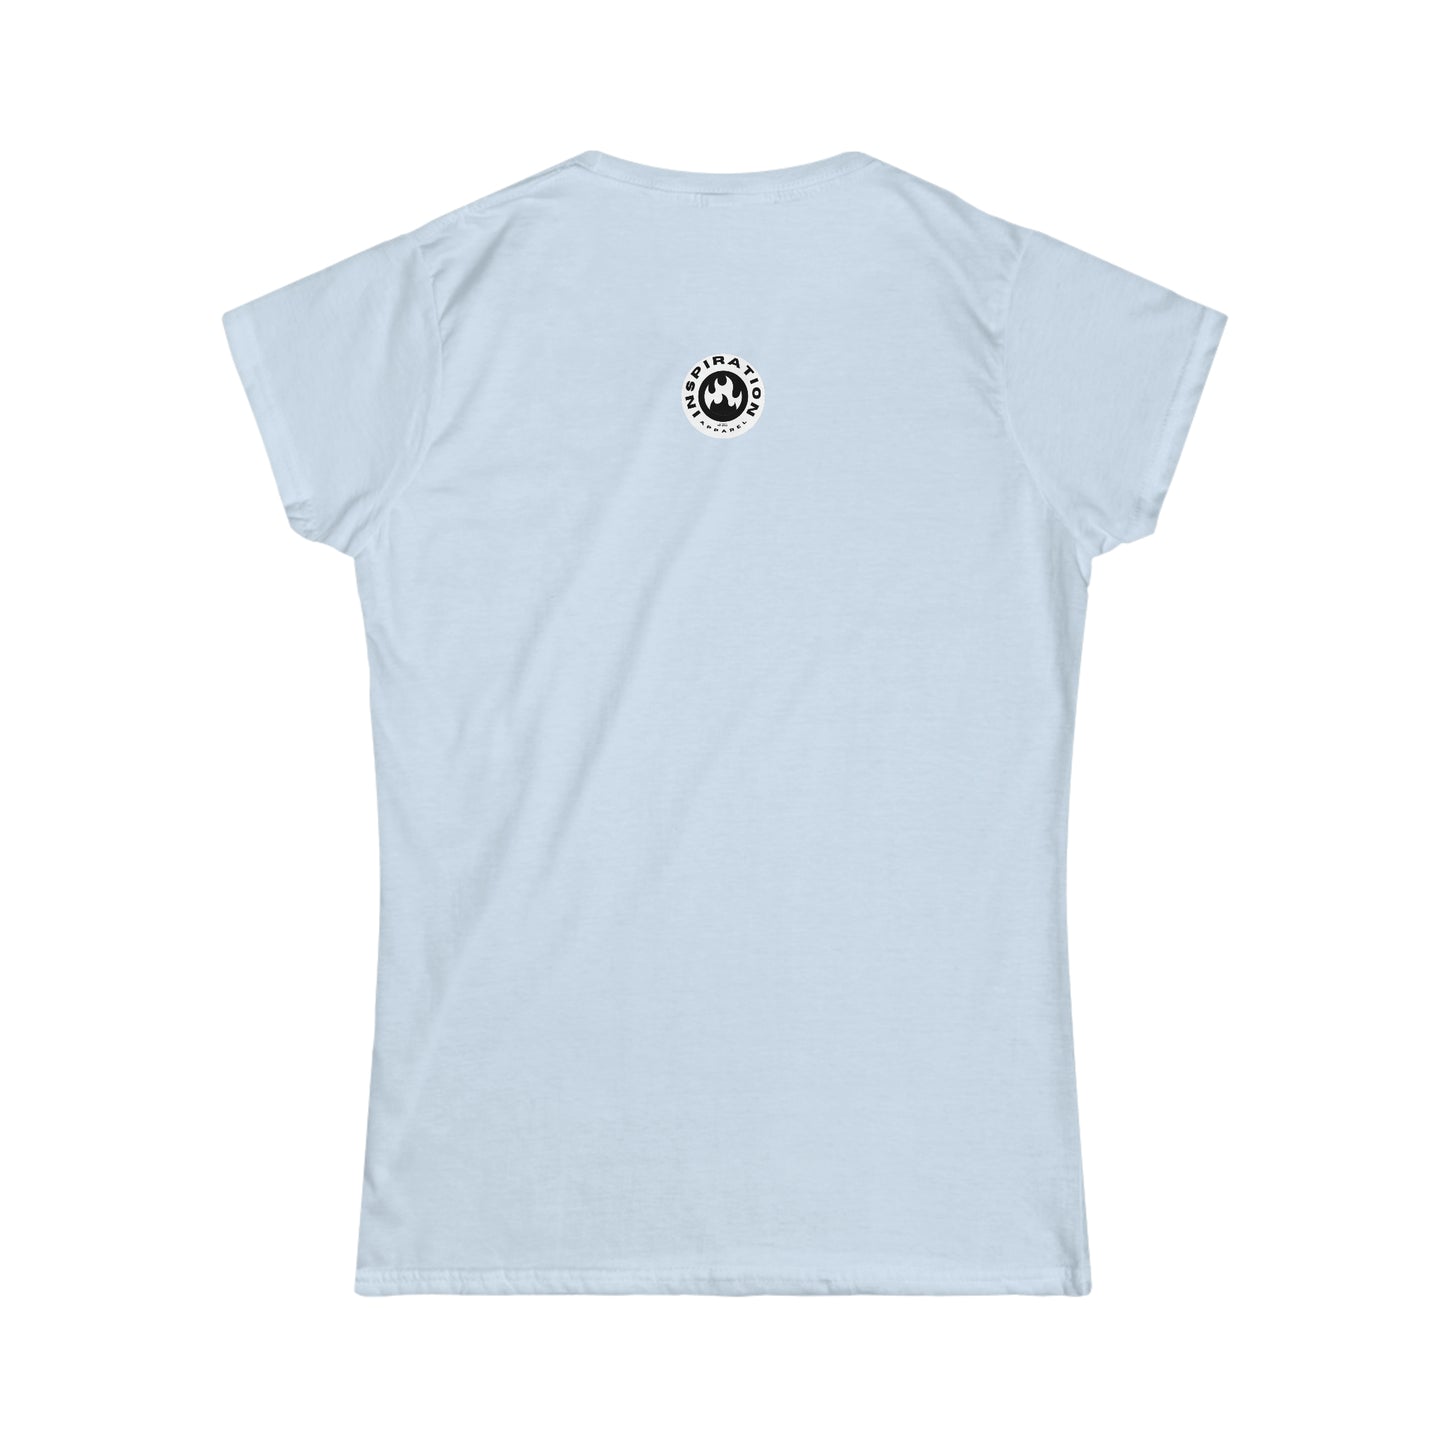 Soul TRANSFORMher ingredient Women's Softstyle Tee